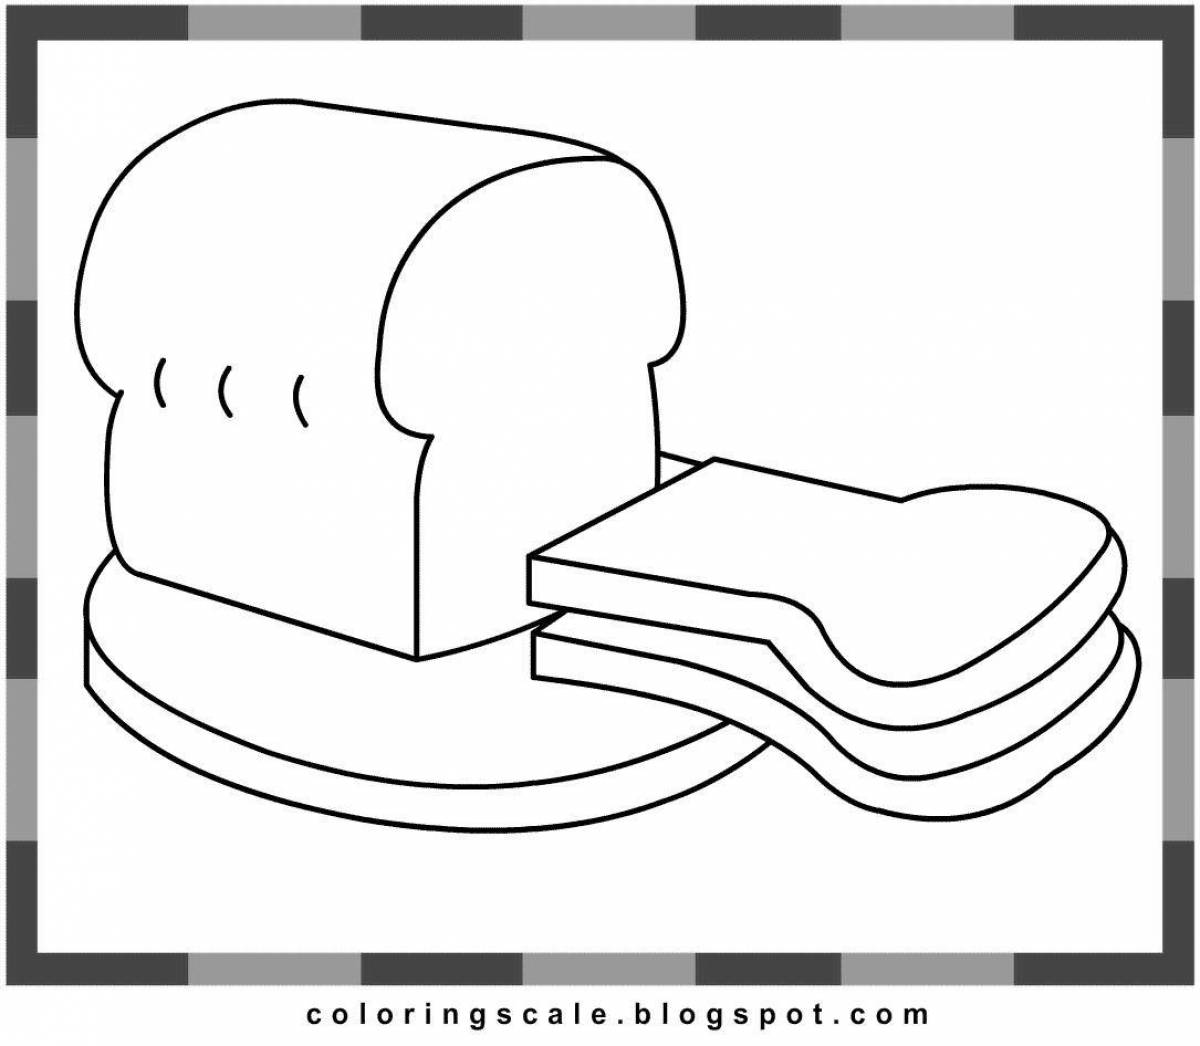 Great bread coloring book for kids